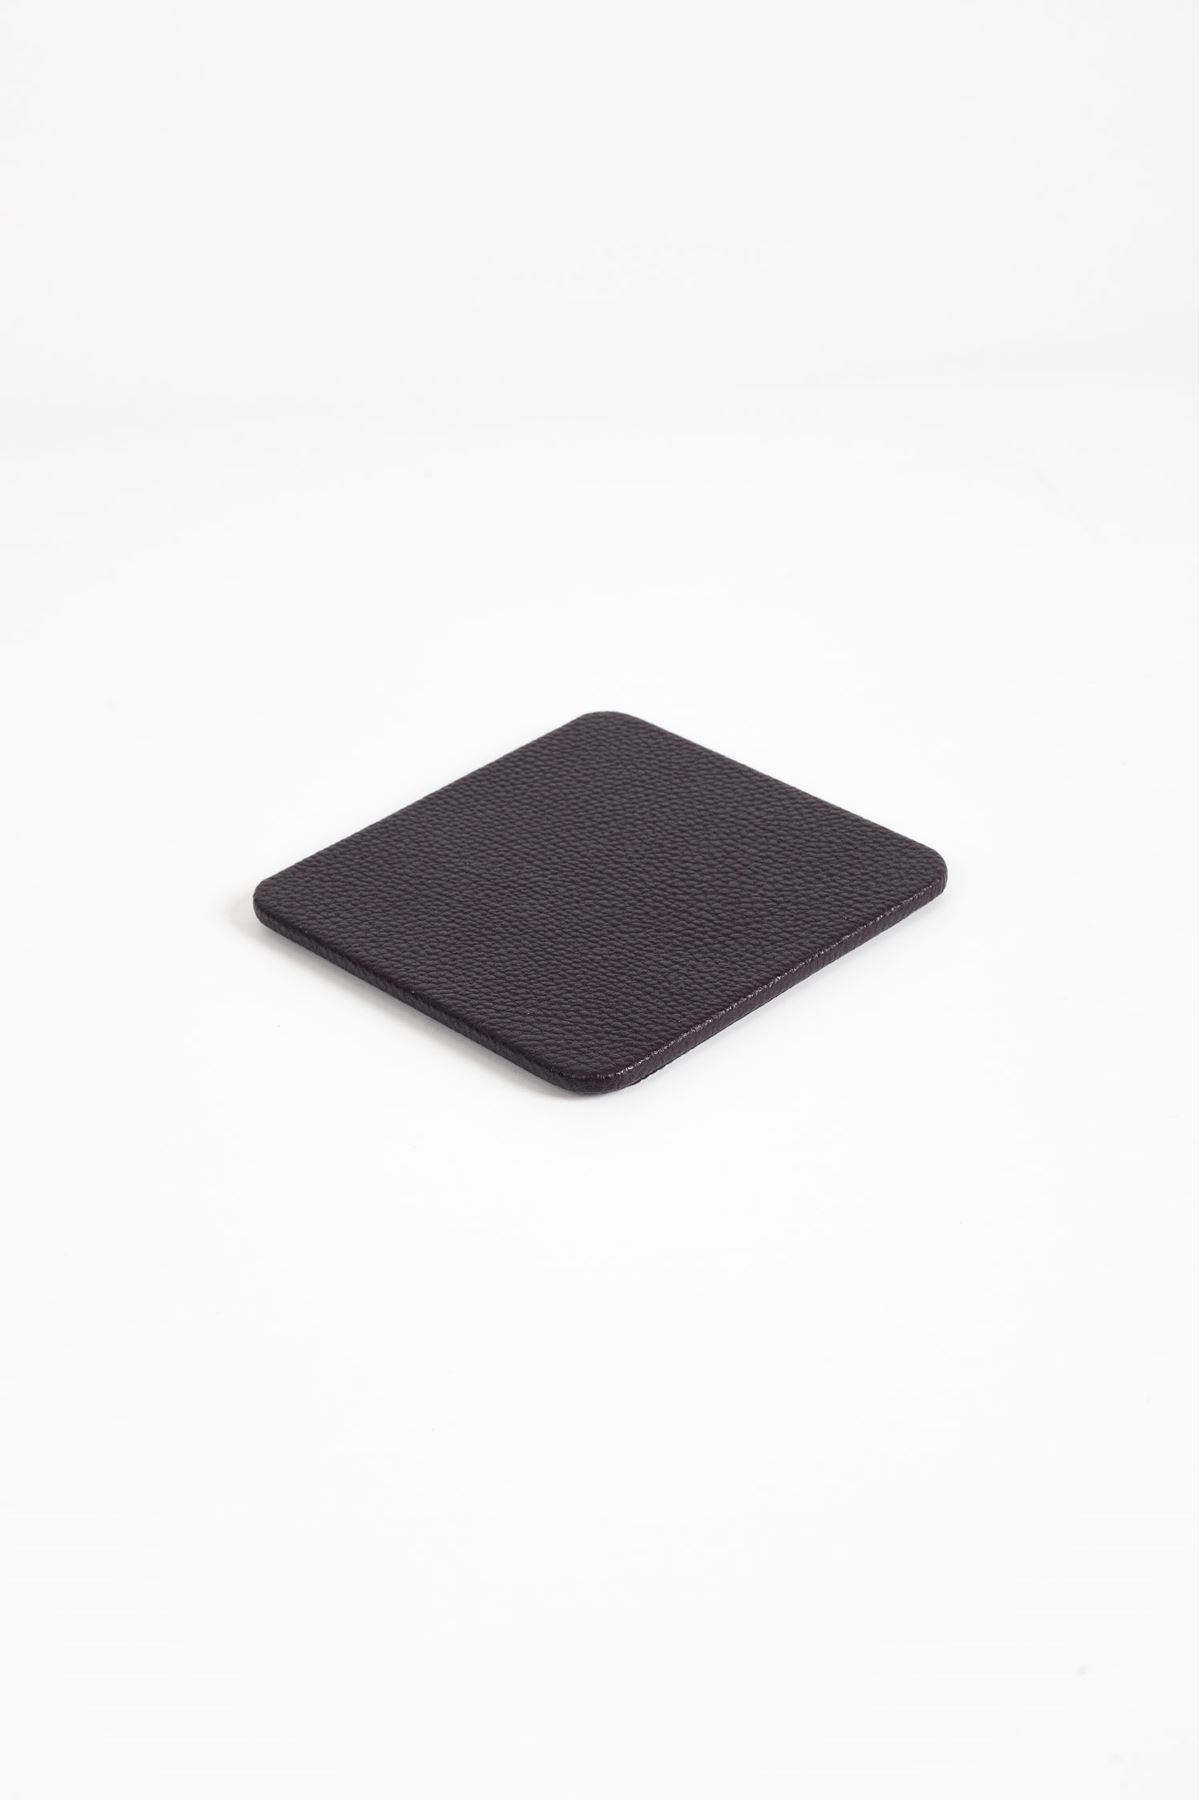 Brown Leather Square Coaster 1 Piece